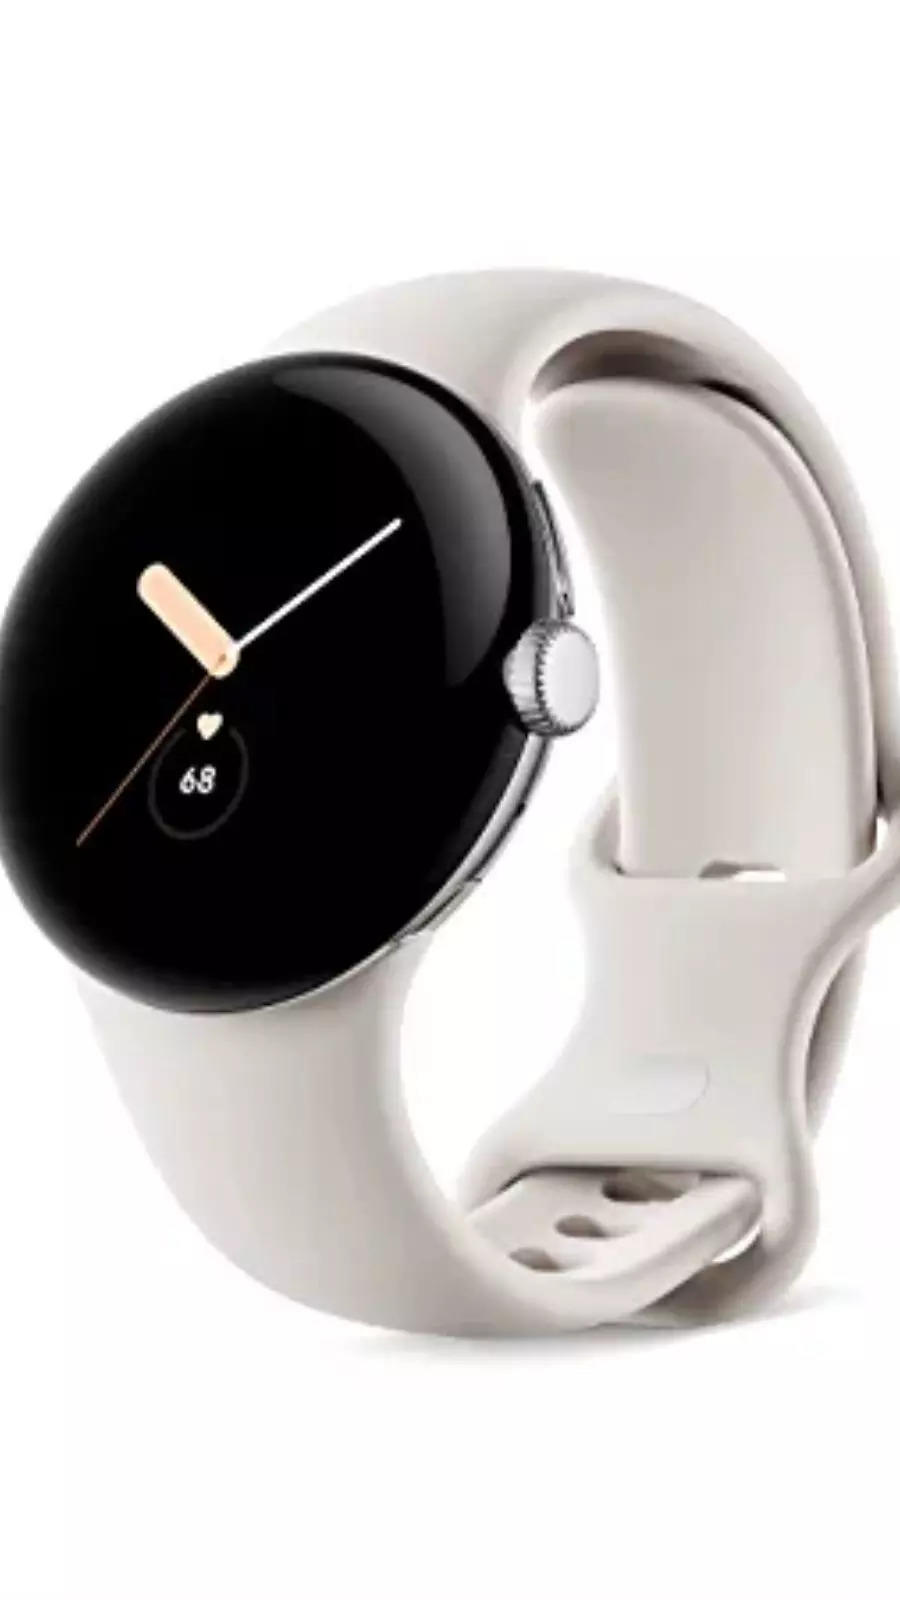 smartwatches 2023: From Apple To Facebook: Smartwatches To Look